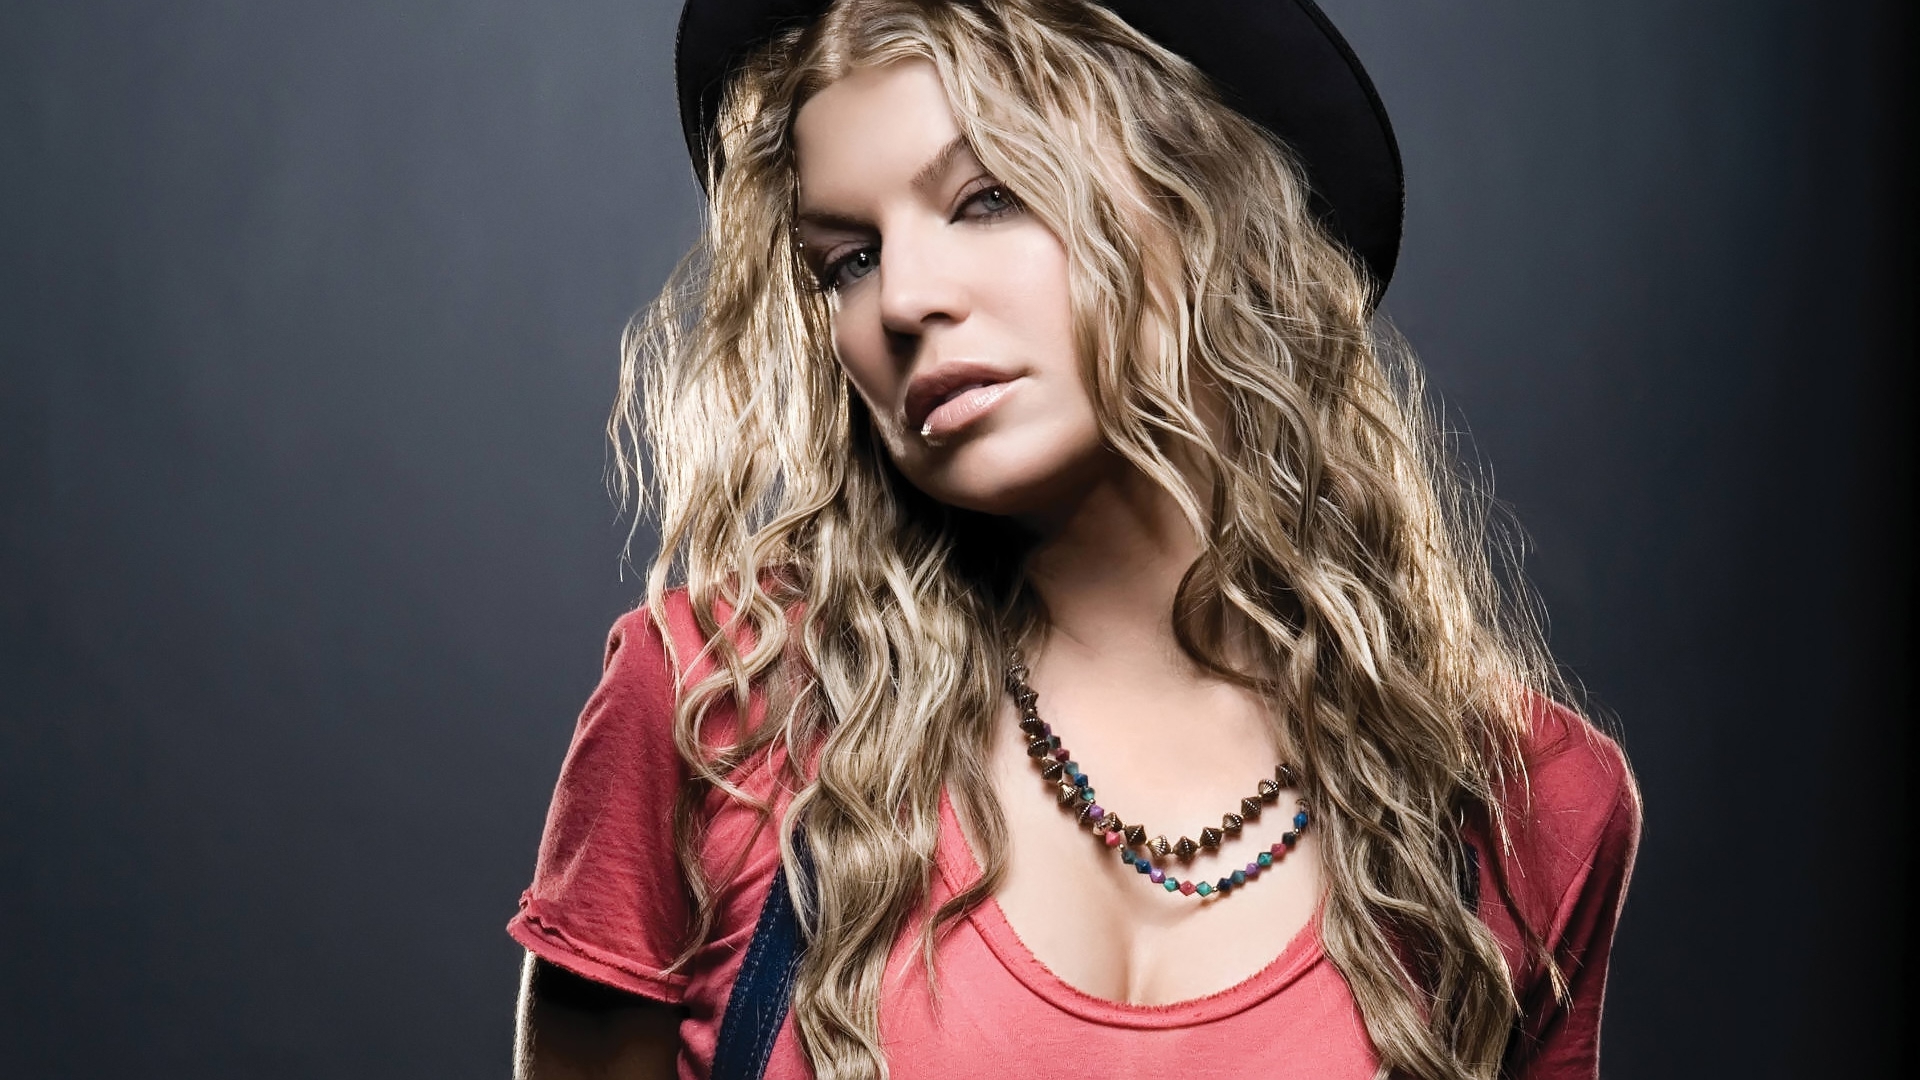 Fergie Wallpaper Image Photos Pictures Background